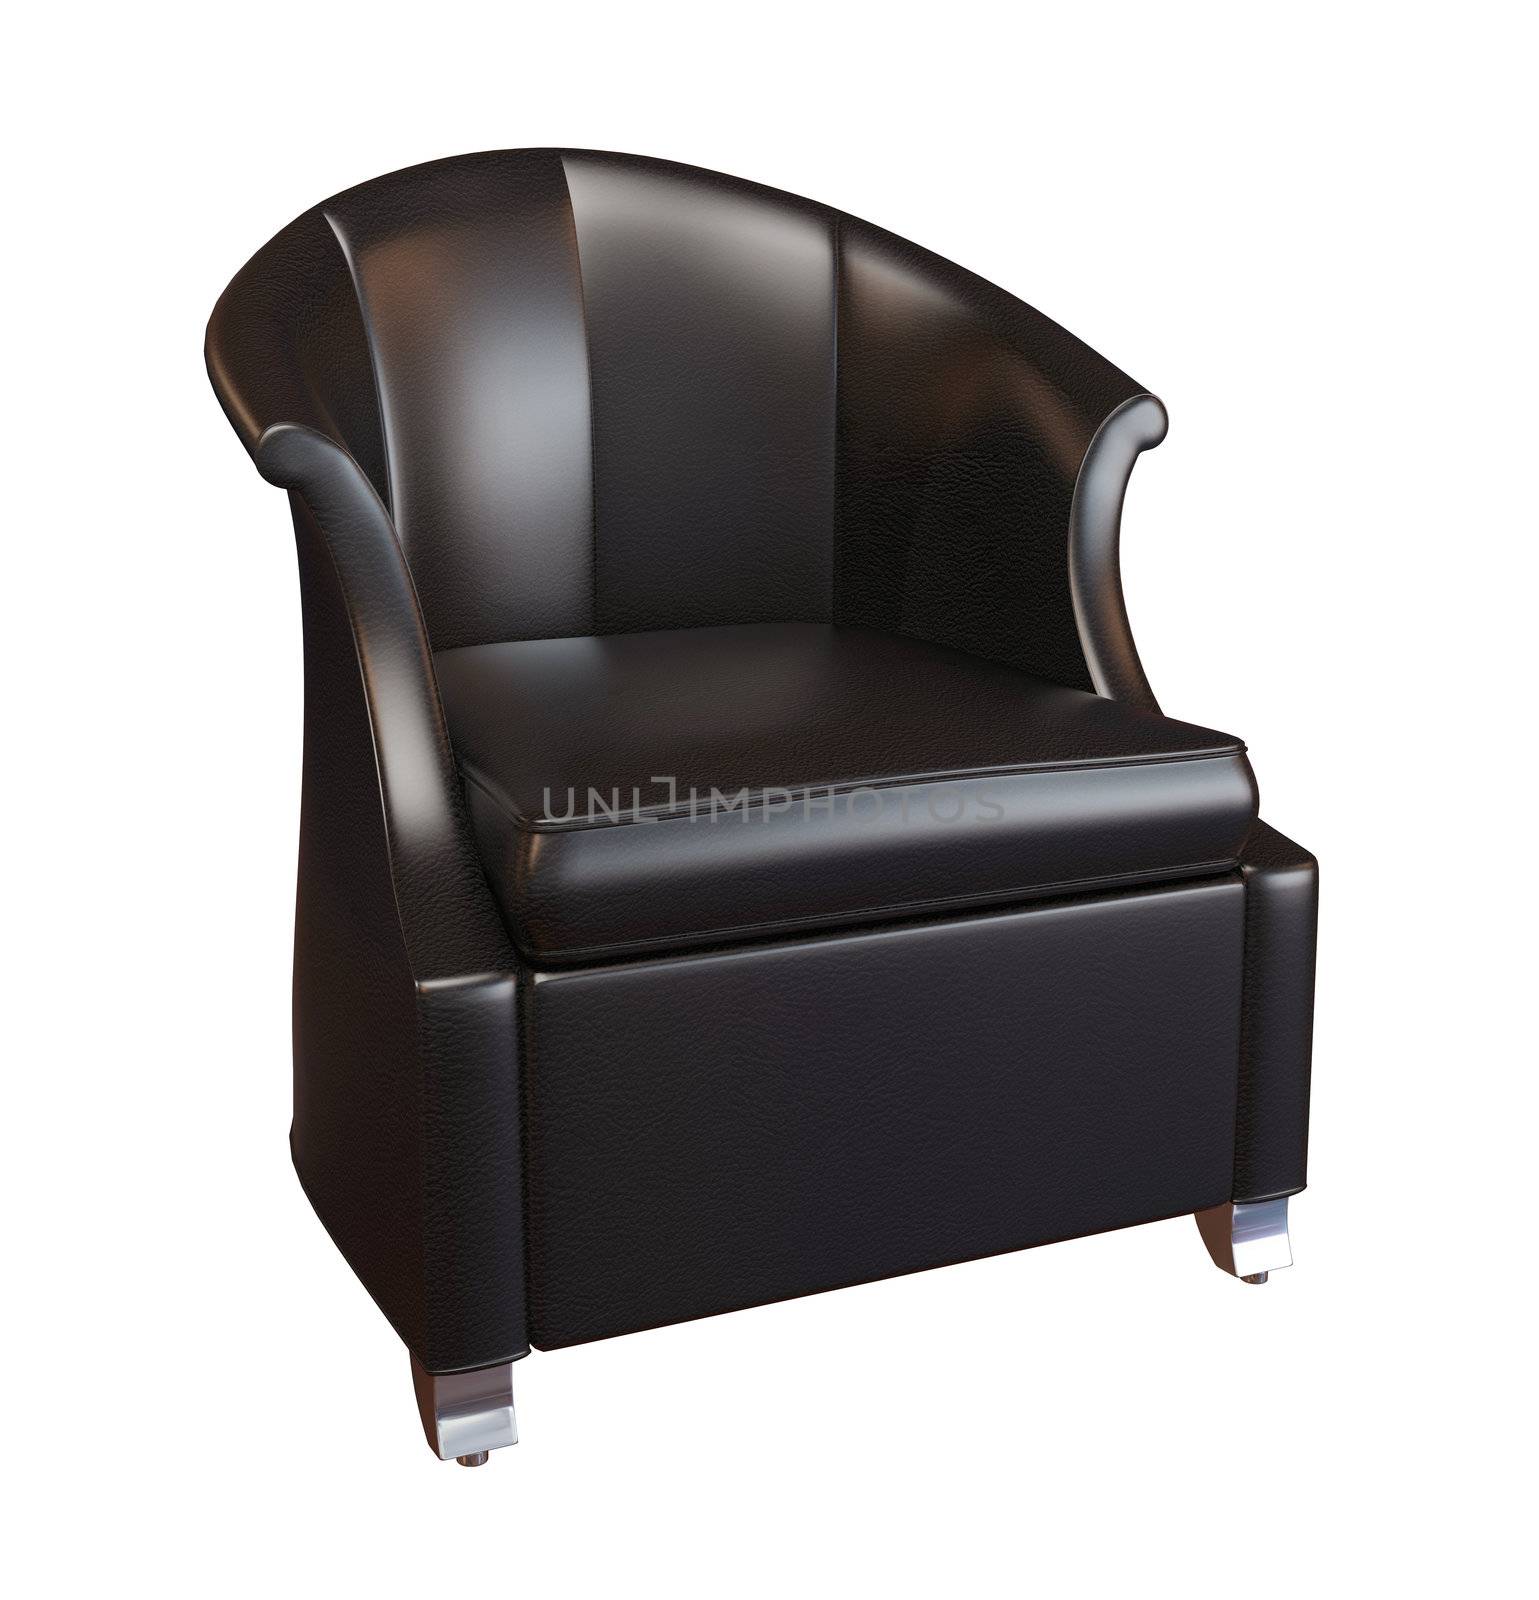 3D photorealistic image of a black leather comfy armchair, isolated against a white background